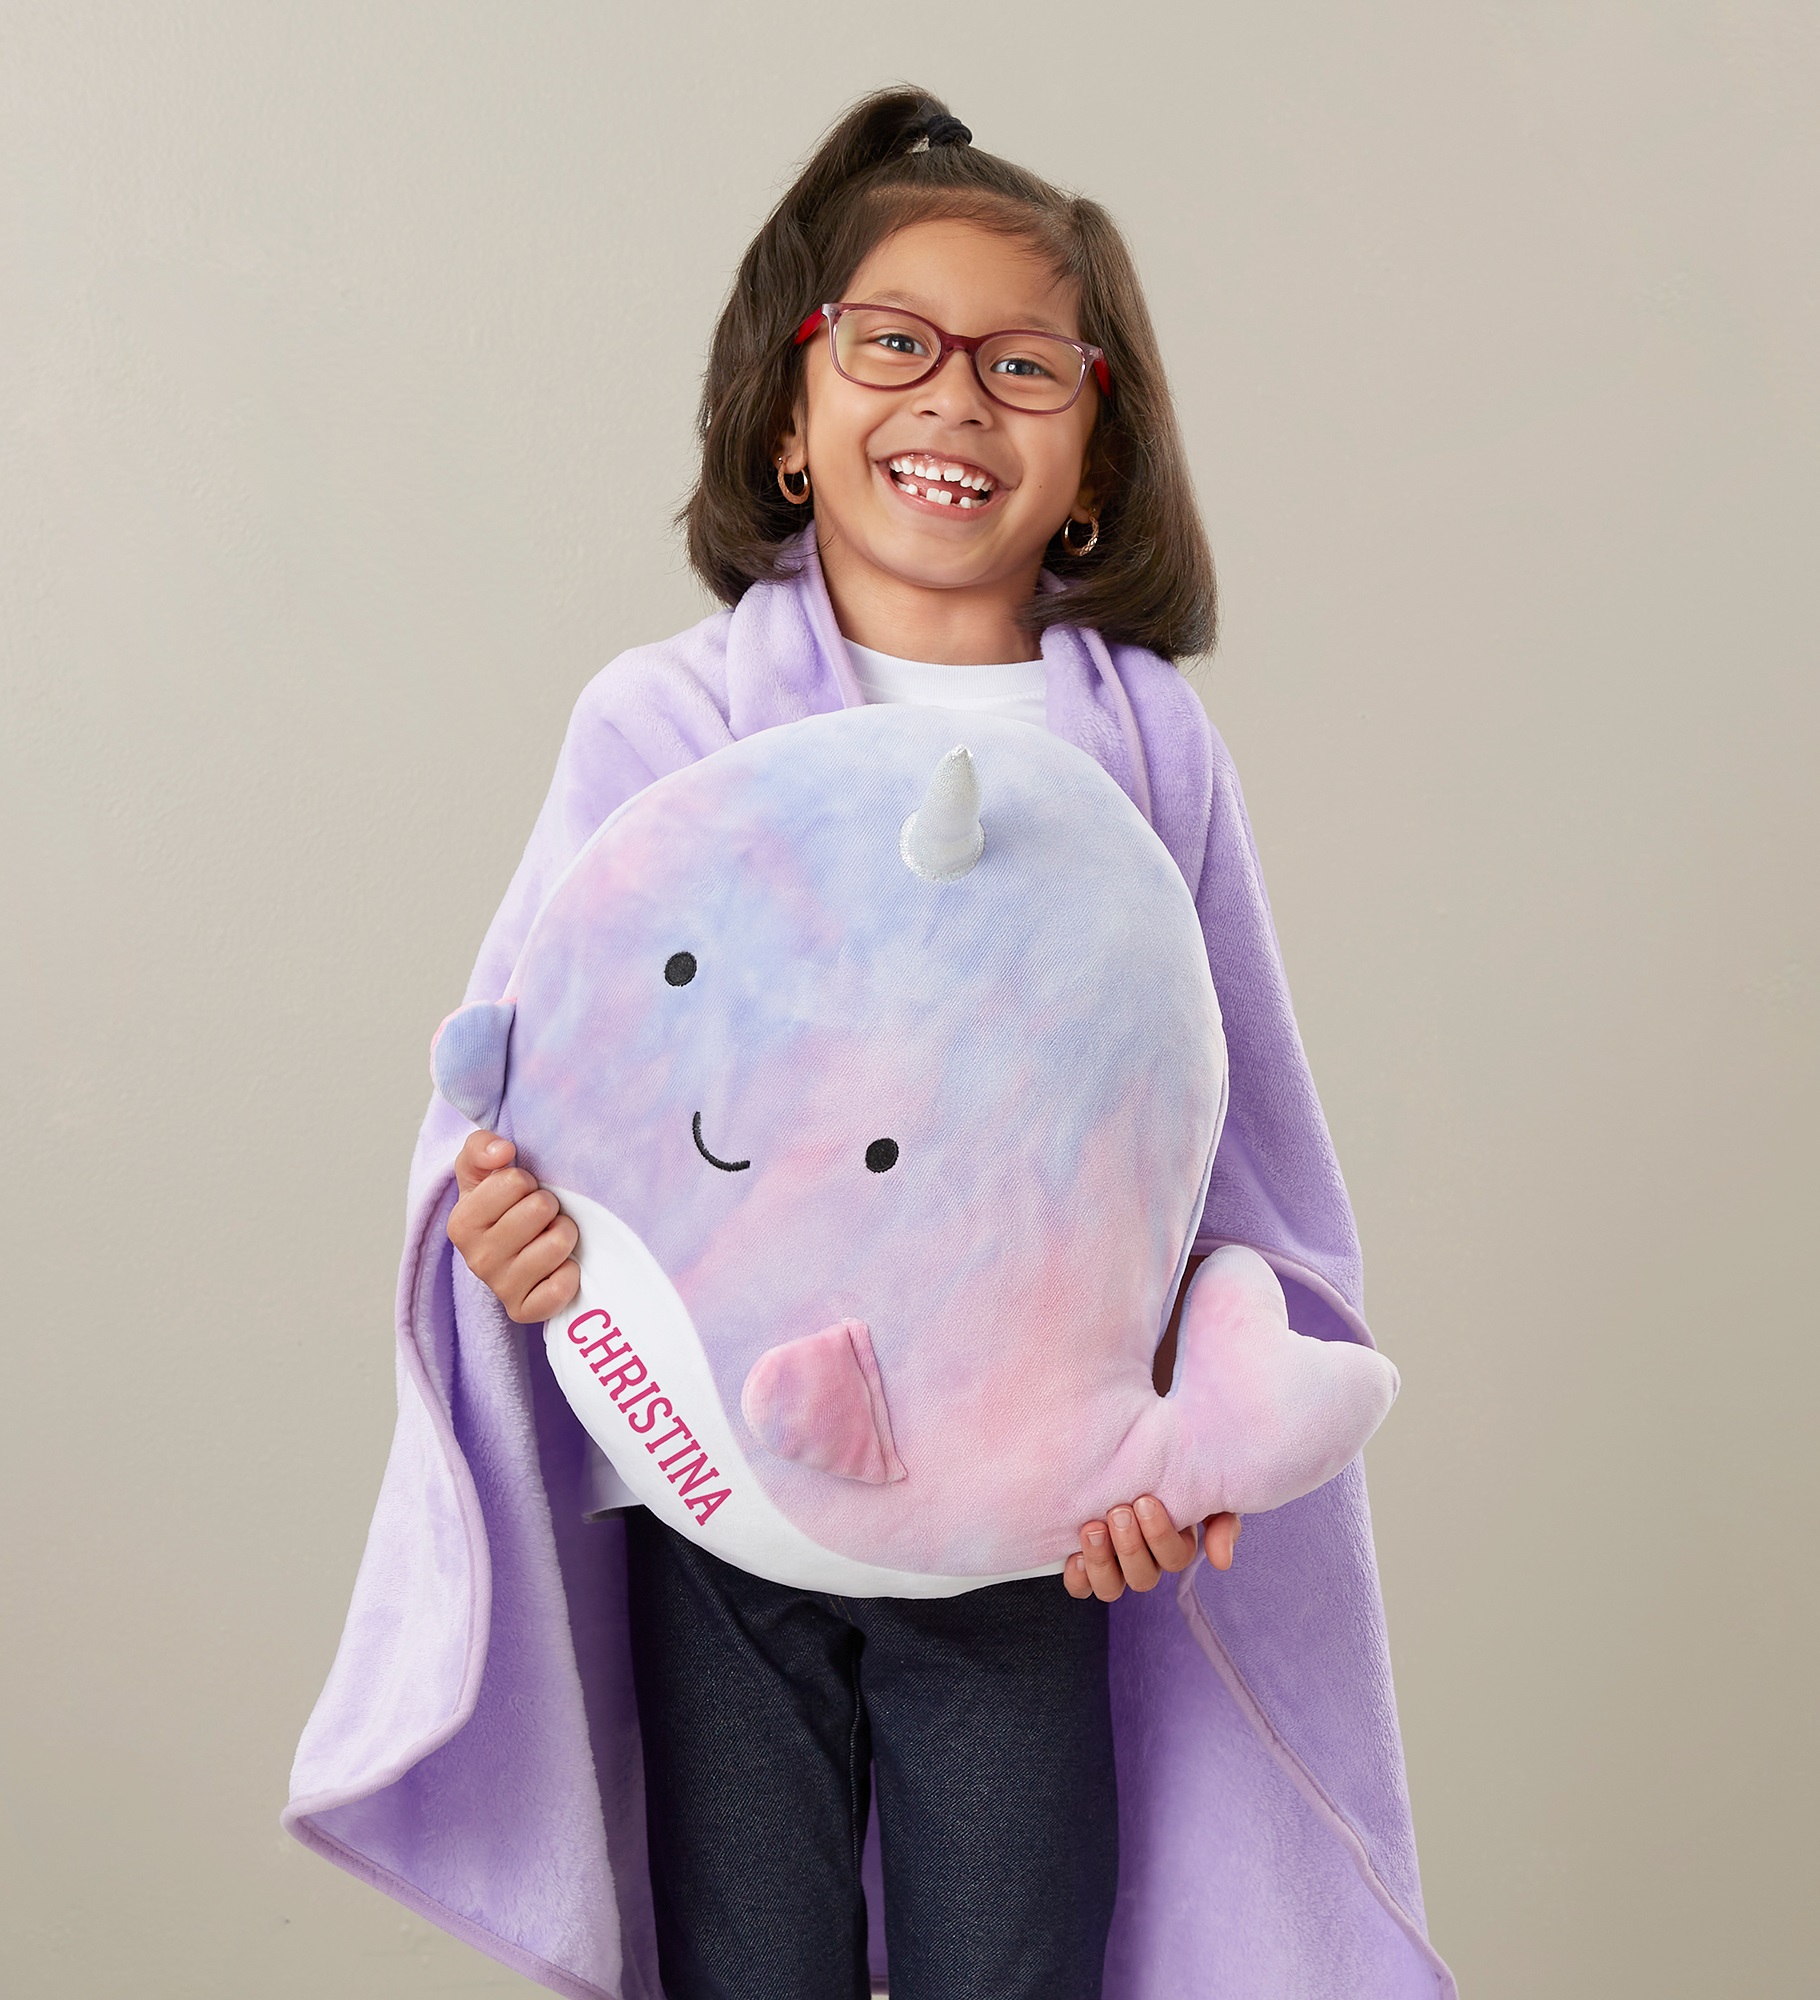 Personalized Plush Narwhal Pillow with Blanket Set